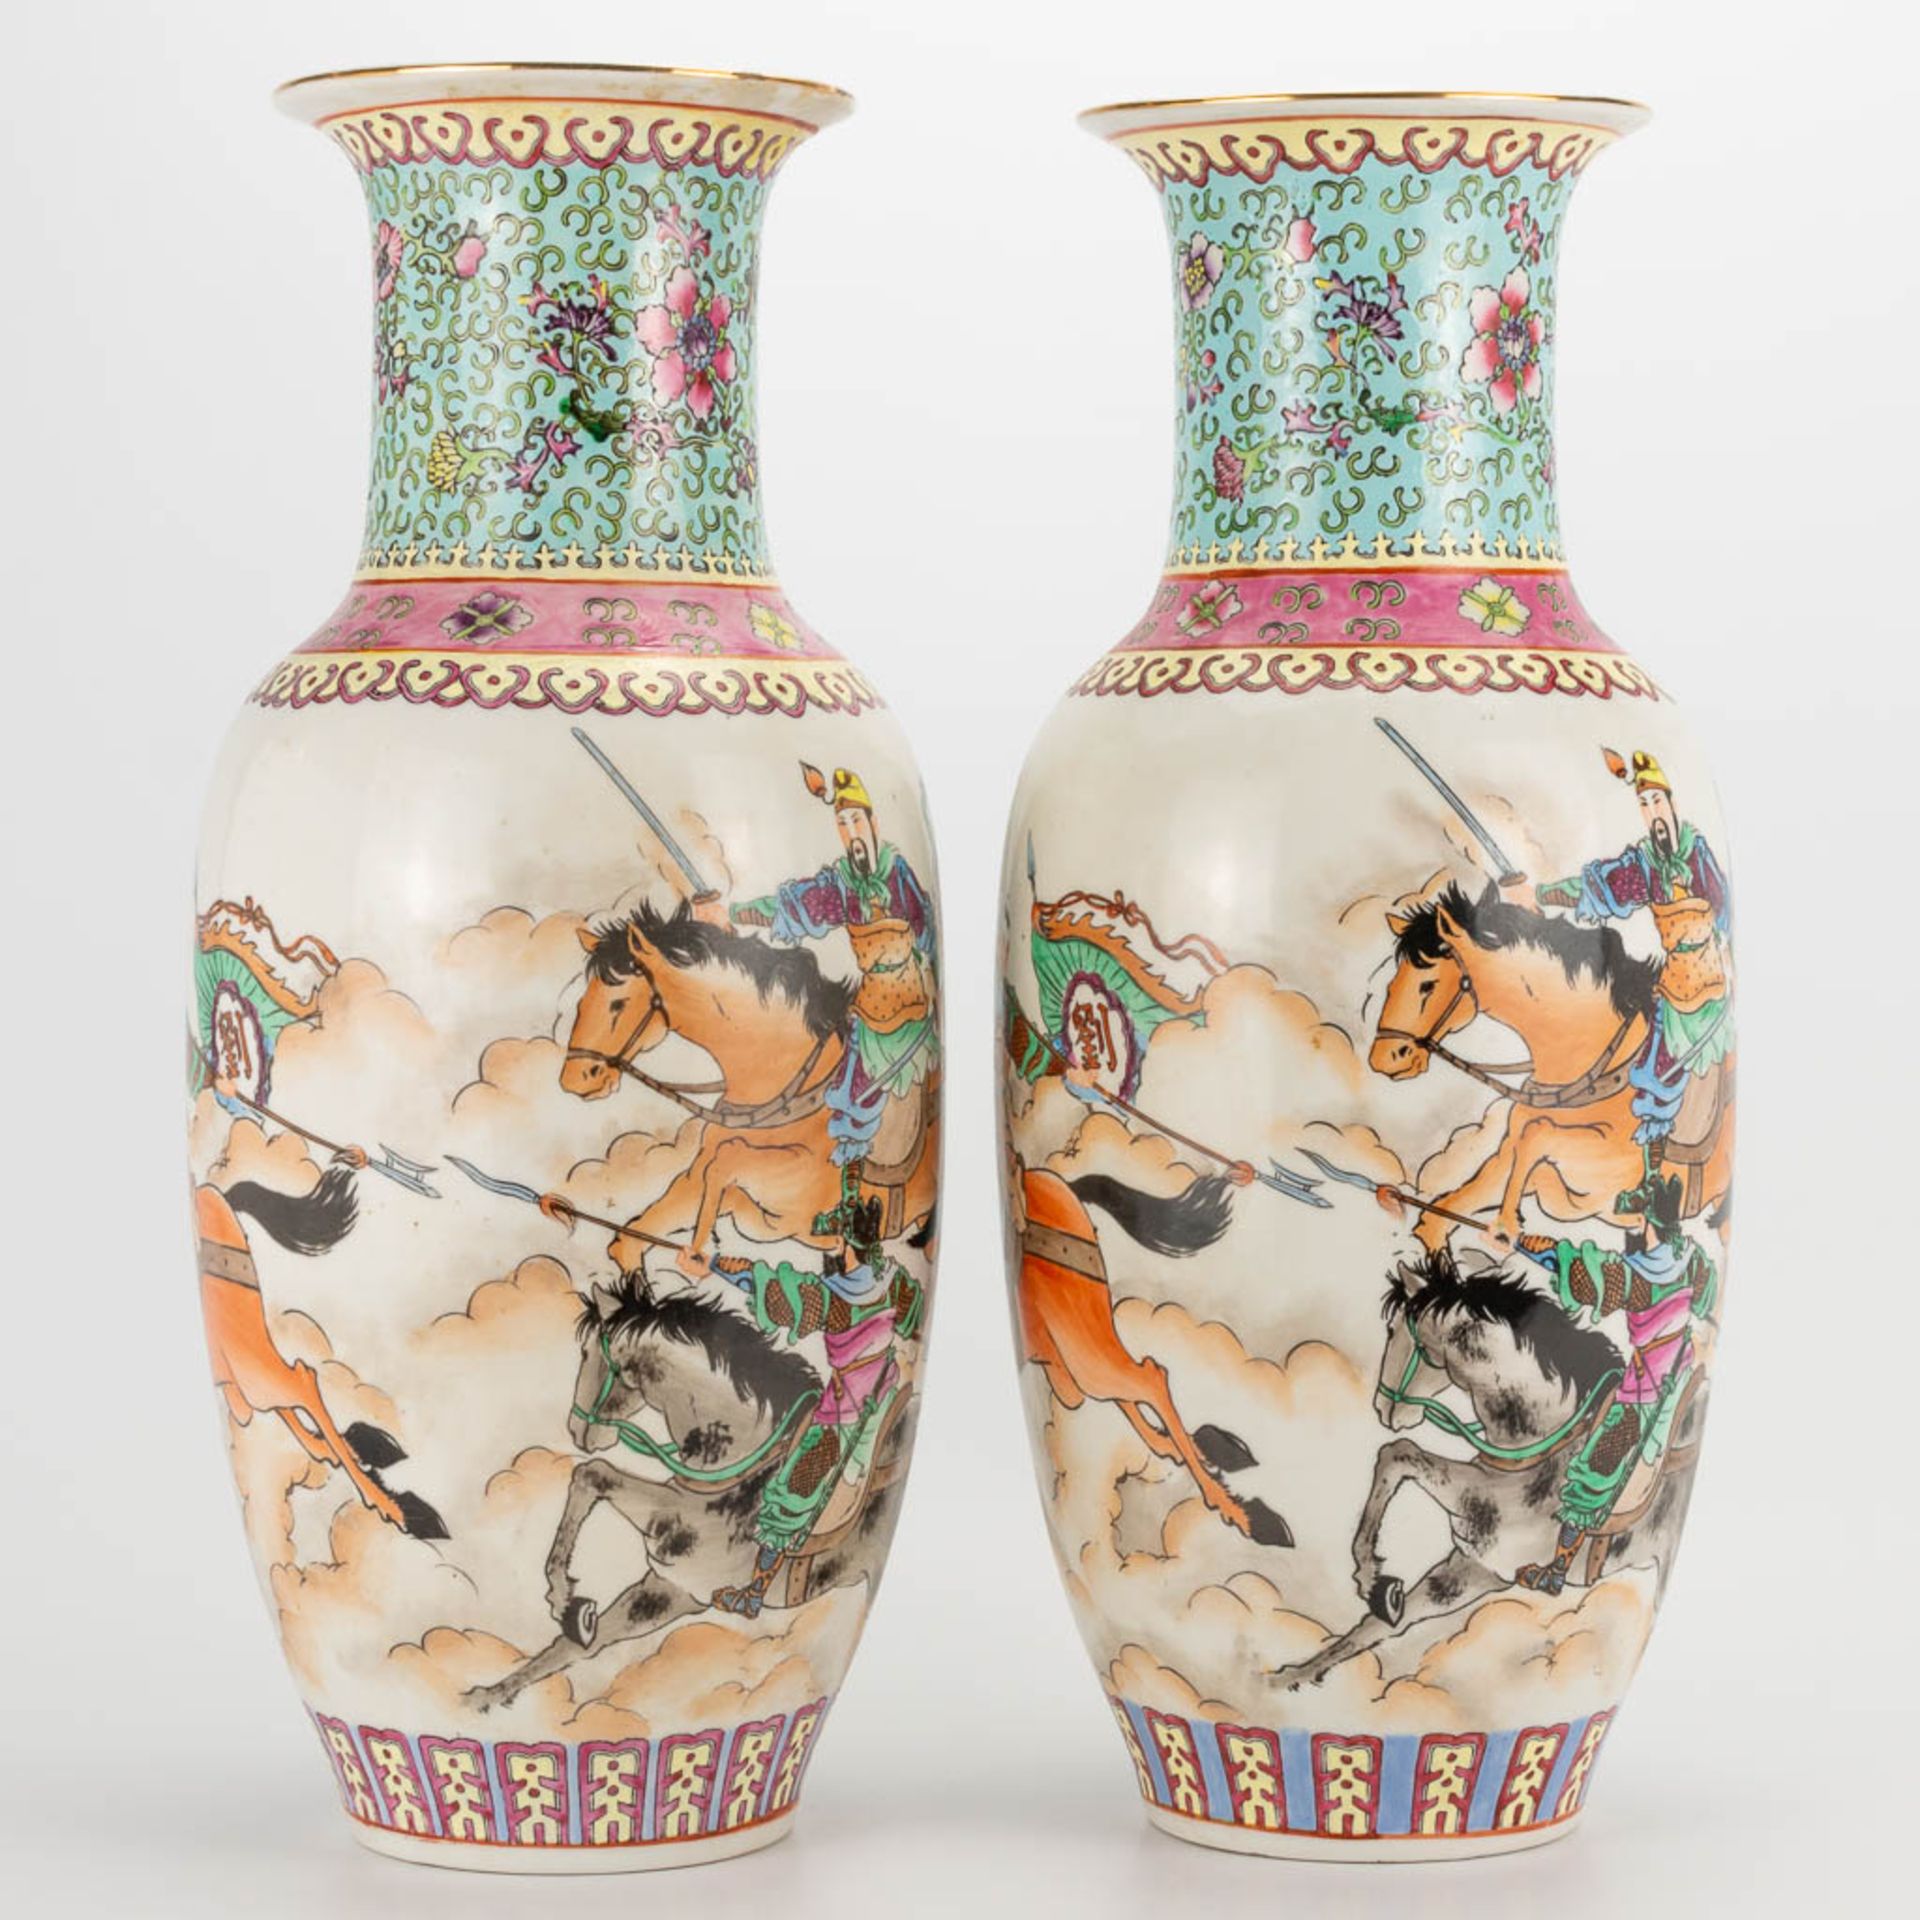 A pair of vases made of Chinese porcelain with decors of knights. 20th century. (46 x 18 cm) - Image 7 of 27